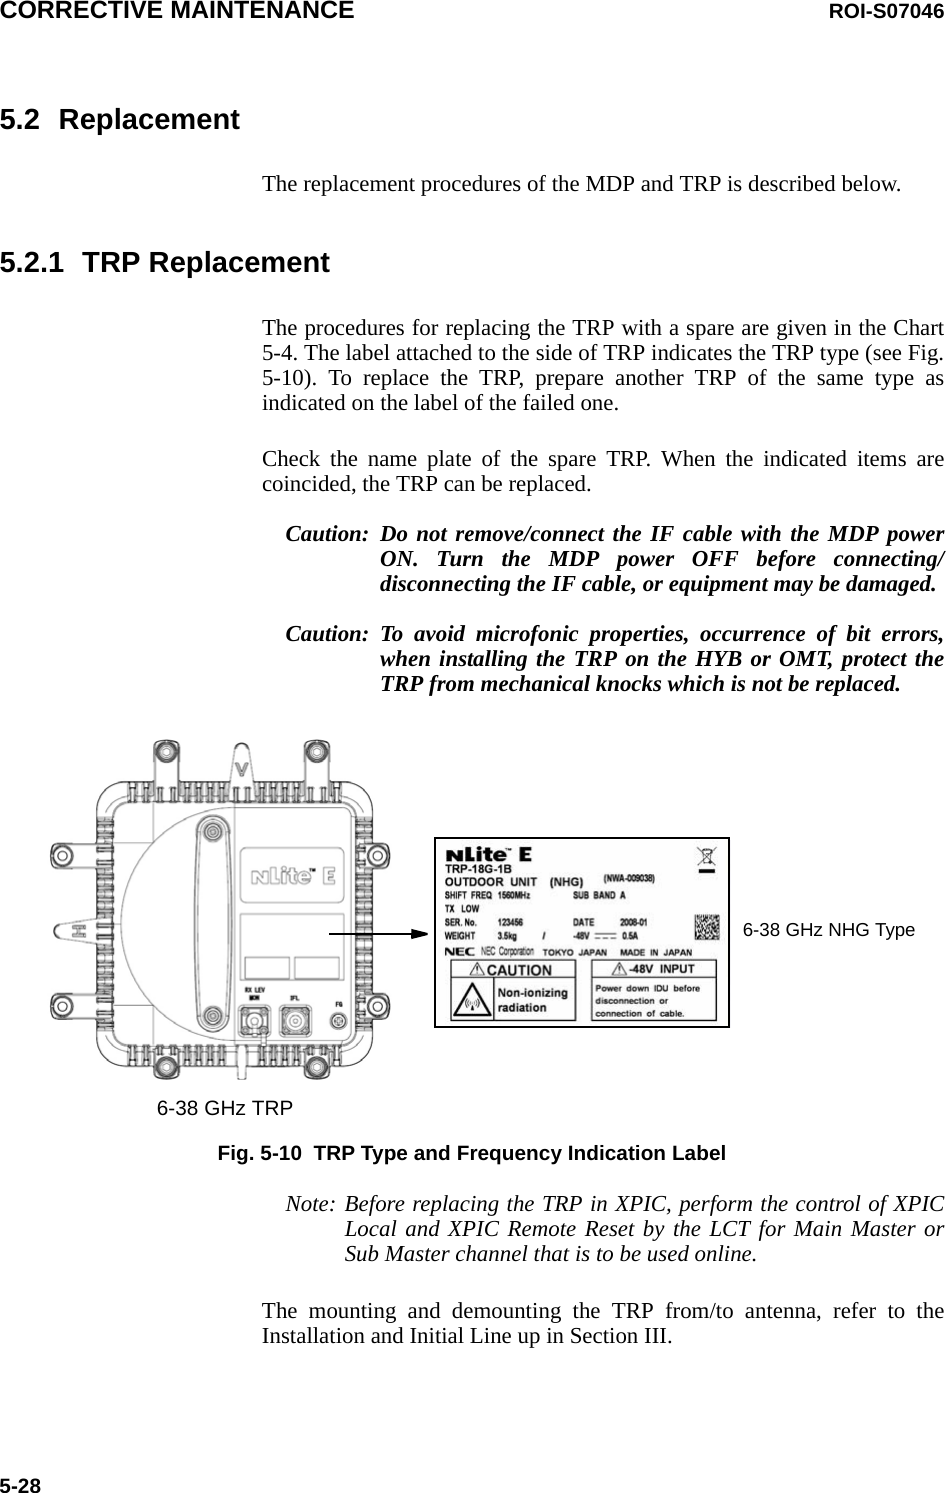 CORRECTIVE MAINTENANCE ROI-S070465-285.2 ReplacementThe replacement procedures of the MDP and TRP is described below.5.2.1 TRP ReplacementThe procedures for replacing the TRP with a spare are given in the Chart5-4. The label attached to the side of TRP indicates the TRP type (see Fig.5-10). To replace the TRP, prepare another TRP of the same type asindicated on the label of the failed one.Check the name plate of the spare TRP. When the indicated items arecoincided, the TRP can be replaced.Caution: Do not remove/connect the IF cable with the MDP powerON. Turn the MDP power OFF before connecting/disconnecting the IF cable, or equipment may be damaged.Caution: To avoid microfonic properties, occurrence of bit errors,when installing the TRP on the HYB or OMT, protect theTRP from mechanical knocks which is not be replaced.Fig. 5-10  TRP Type and Frequency Indication LabelNote: Before replacing the TRP in XPIC, perform the control of XPICLocal and XPIC Remote Reset by the LCT for Main Master orSub Master channel that is to be used online.The mounting and demounting the TRP from/to antenna, refer to theInstallation and Initial Line up in Section III.6-38 GHz TRP6-38 GHz NHG Type